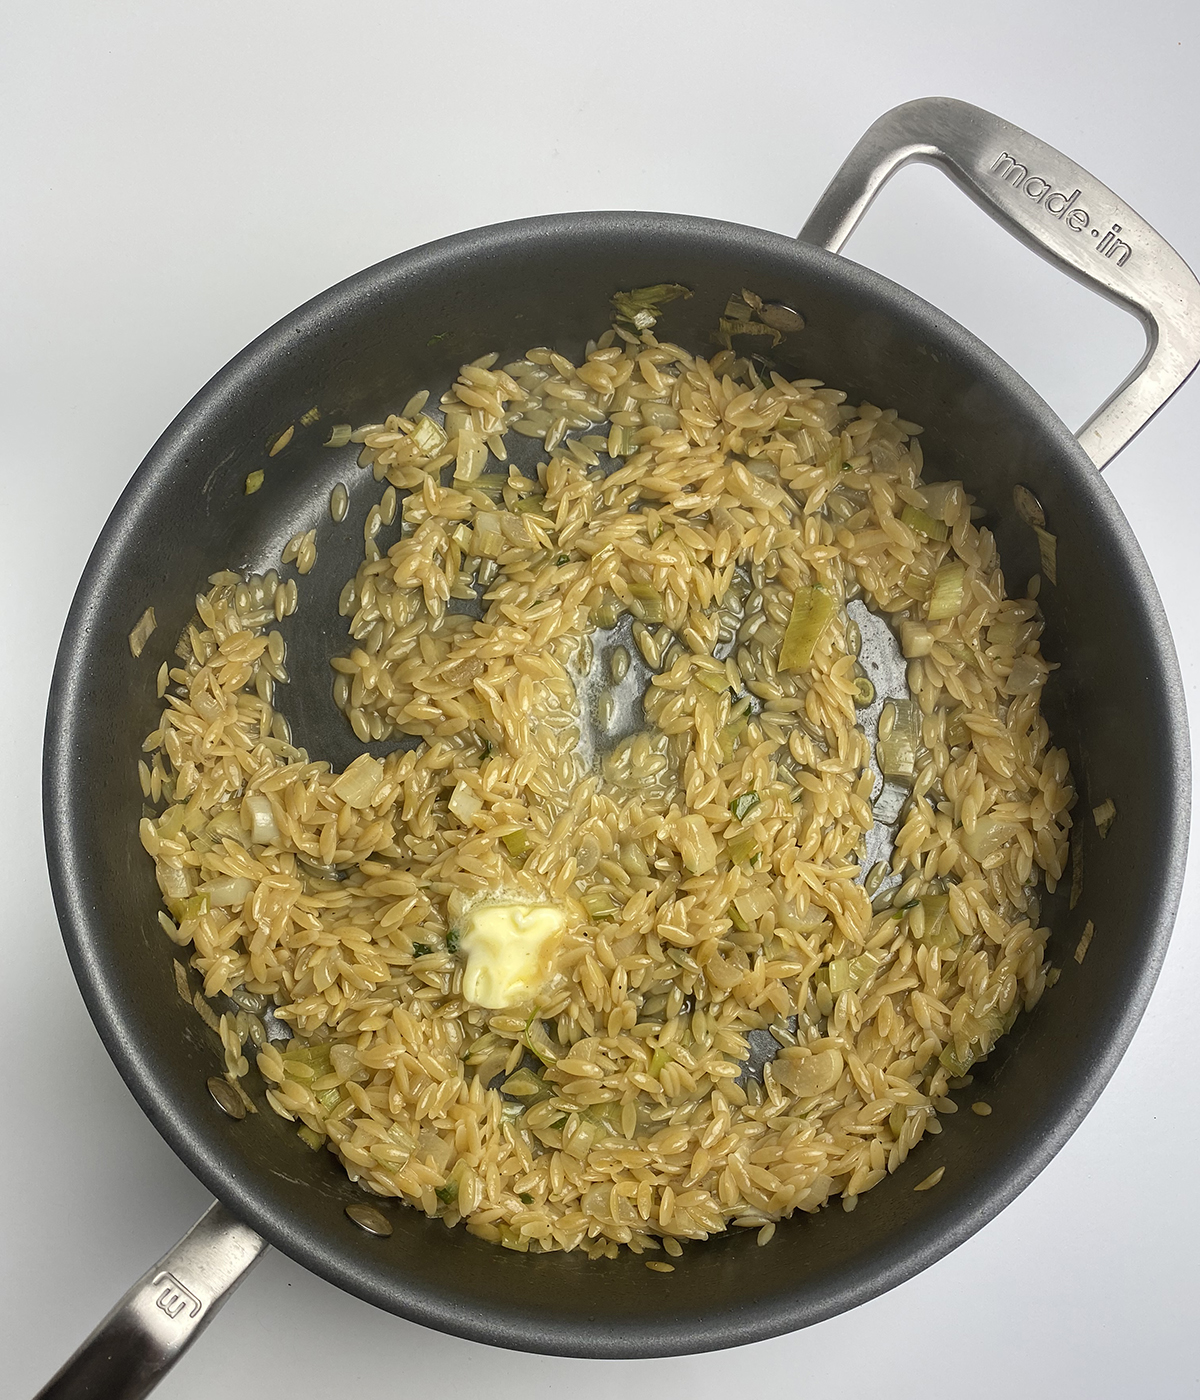 Lemon orzo in a skillet with some butter.